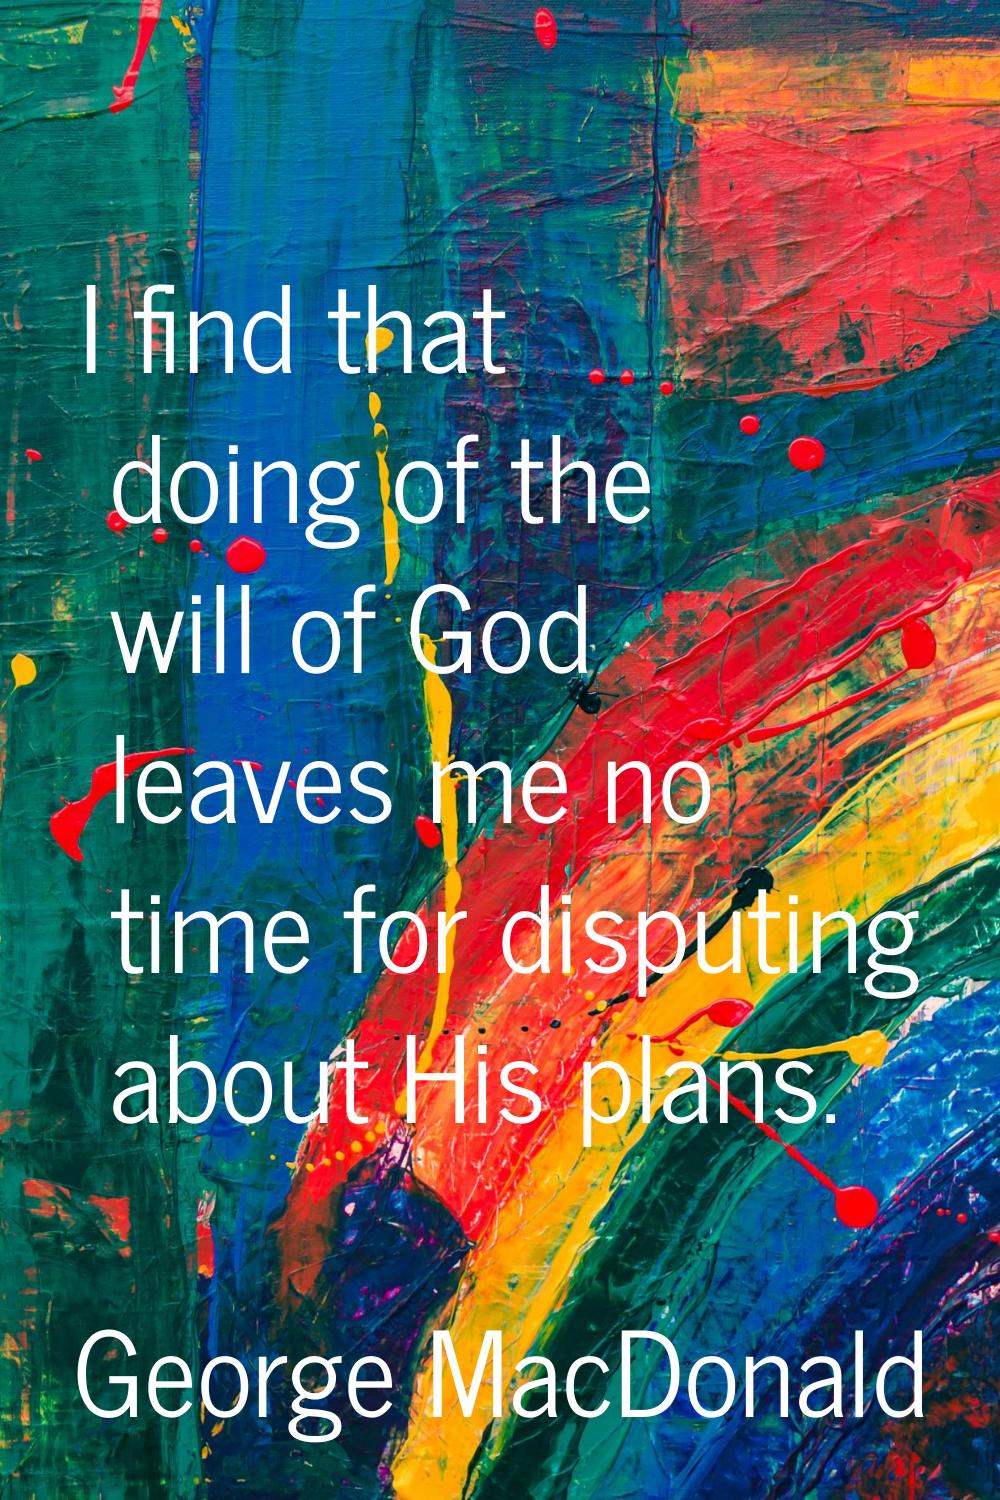 I find that doing of the will of God leaves me no time for disputing about His plans.